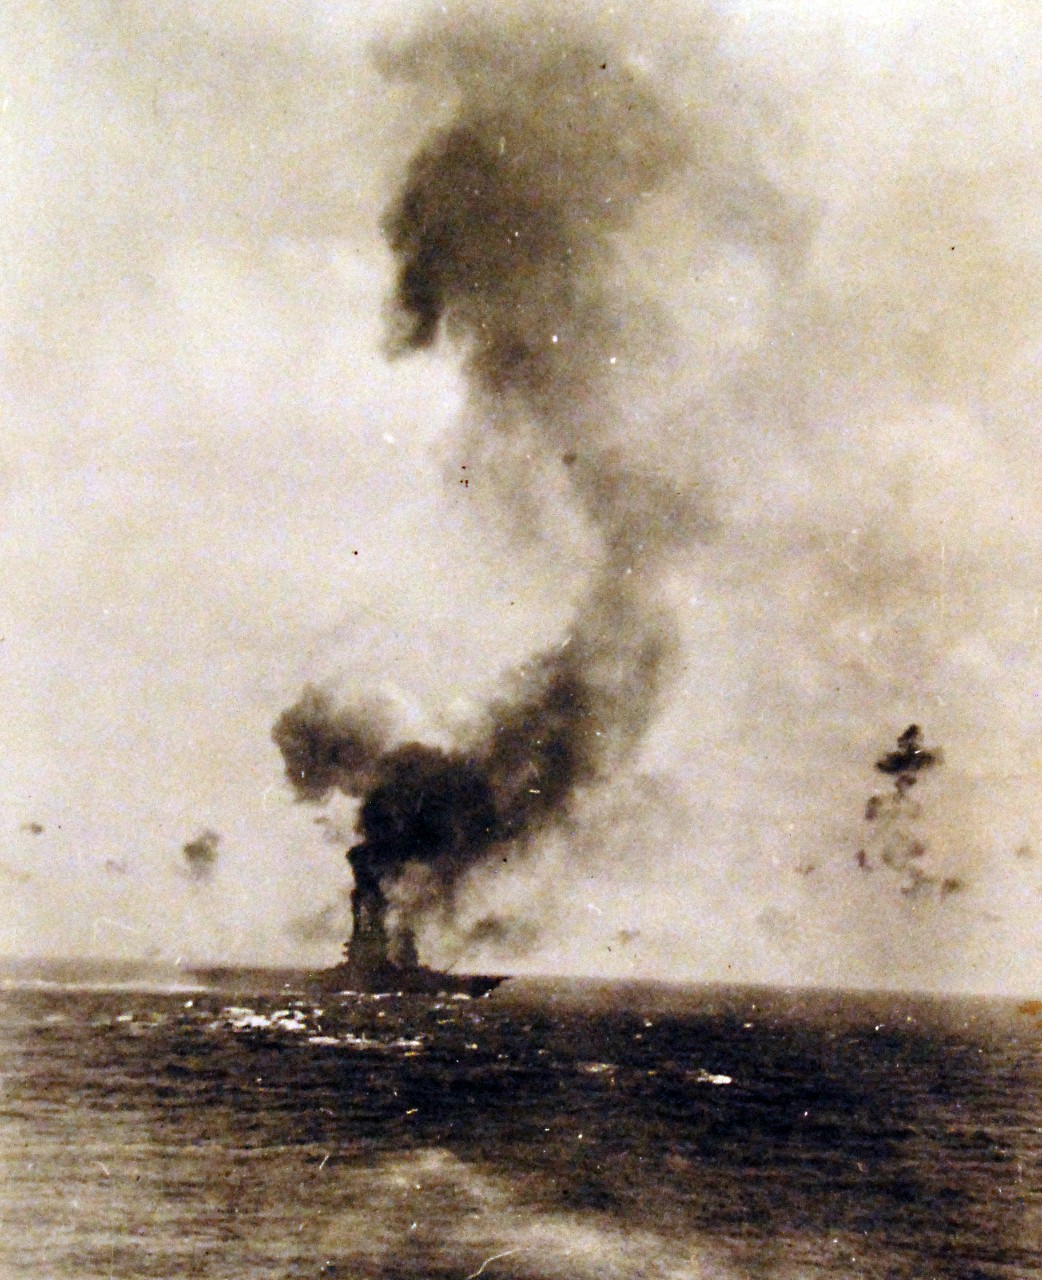 80-G-16665:   Battle of the Coral Sea, May 1942.  A "mushroom cloud" rises after a heavy explosion on board USS Lexington (CV-2), 8 May 1942. This is probably the "great explosion" from the detonation of torpedo warheads stowed in the starboard side of the hangar, aft, that followed an explosion amidships at 1727 hrs. Official U.S. Navy Photograph, now in the collections of the National Archives.       (4/10/2014).